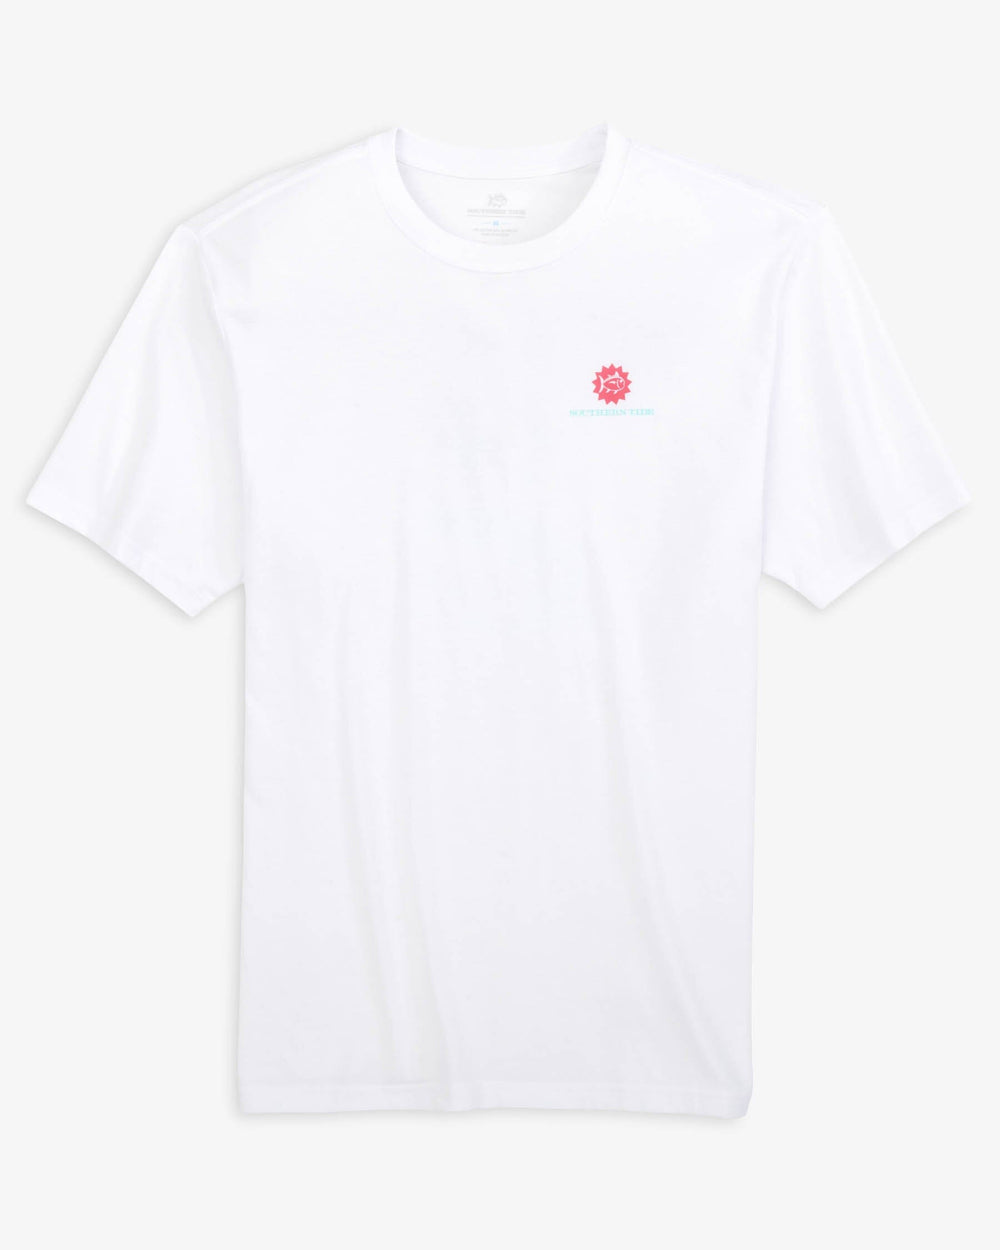 The front view of the Southern Tide Beach Bound T-shirt by Southern Tide - Classic White